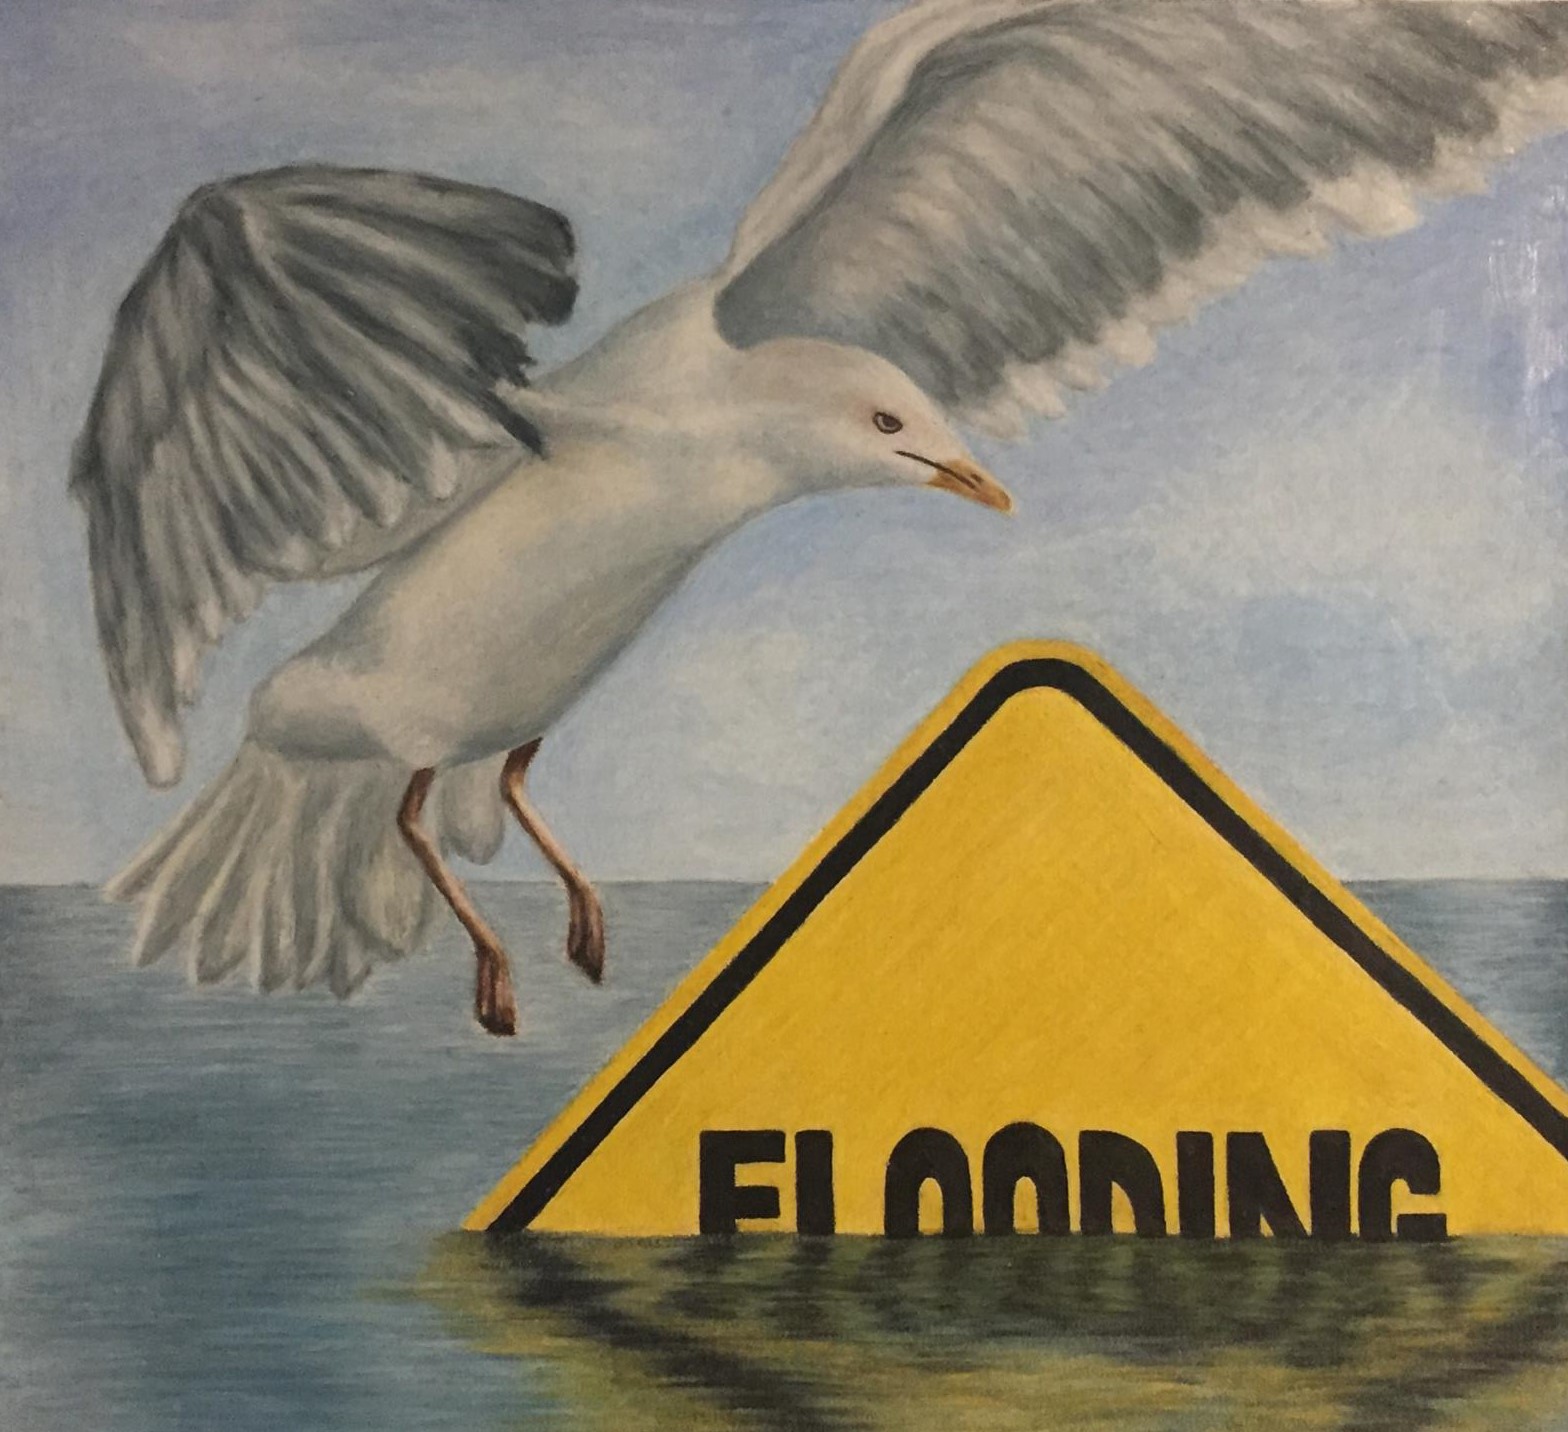 a seagull landing on a mostly-submerged road sign that says FLOODING